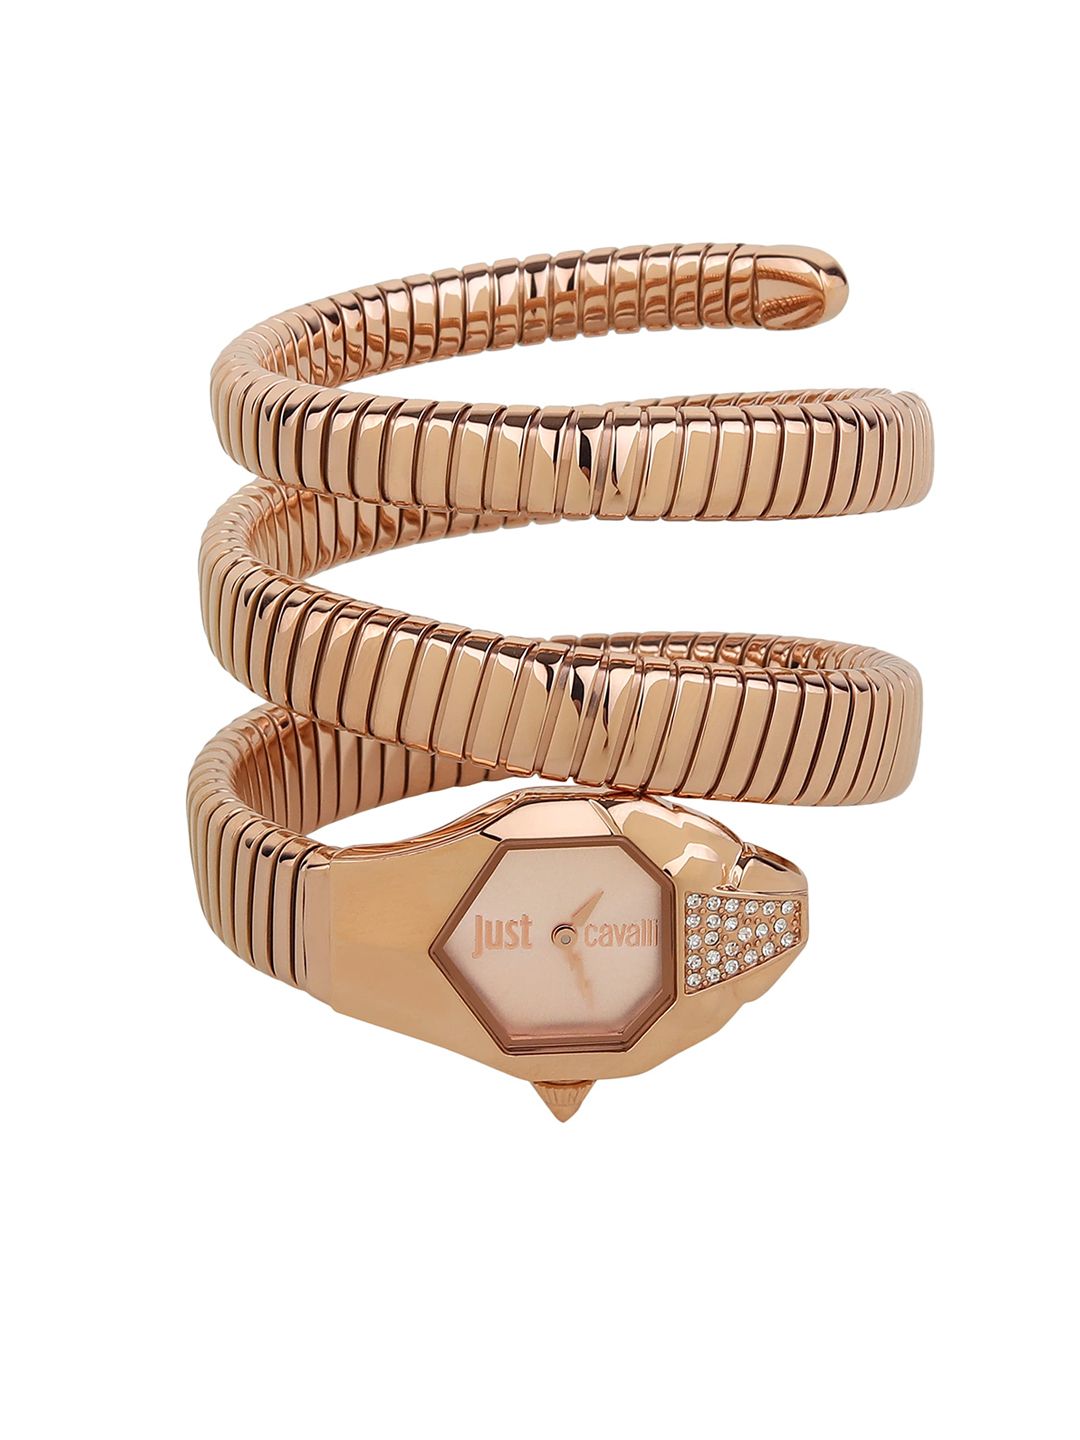 Just Cavalli Women Rose Gold-Toned Brass Embellished Dial & Bracelet Style Analogue Watch Price in India